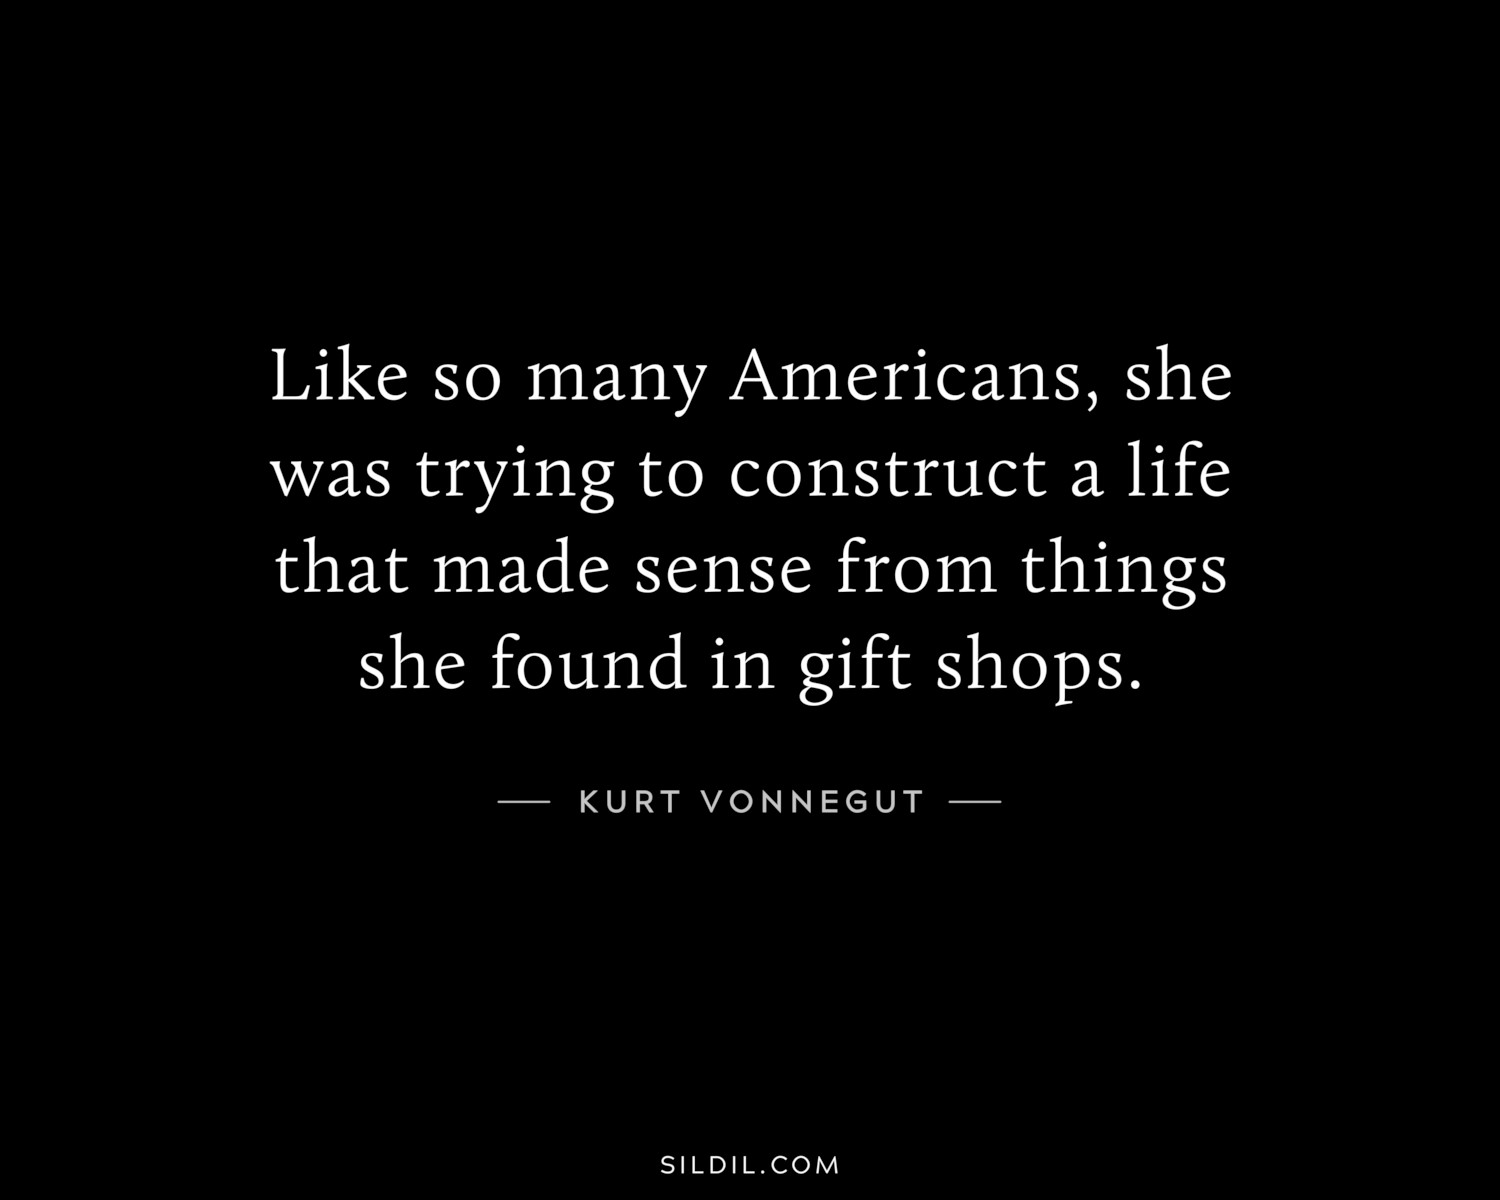 Like so many Americans, she was trying to construct a life that made sense from things she found in gift shops.